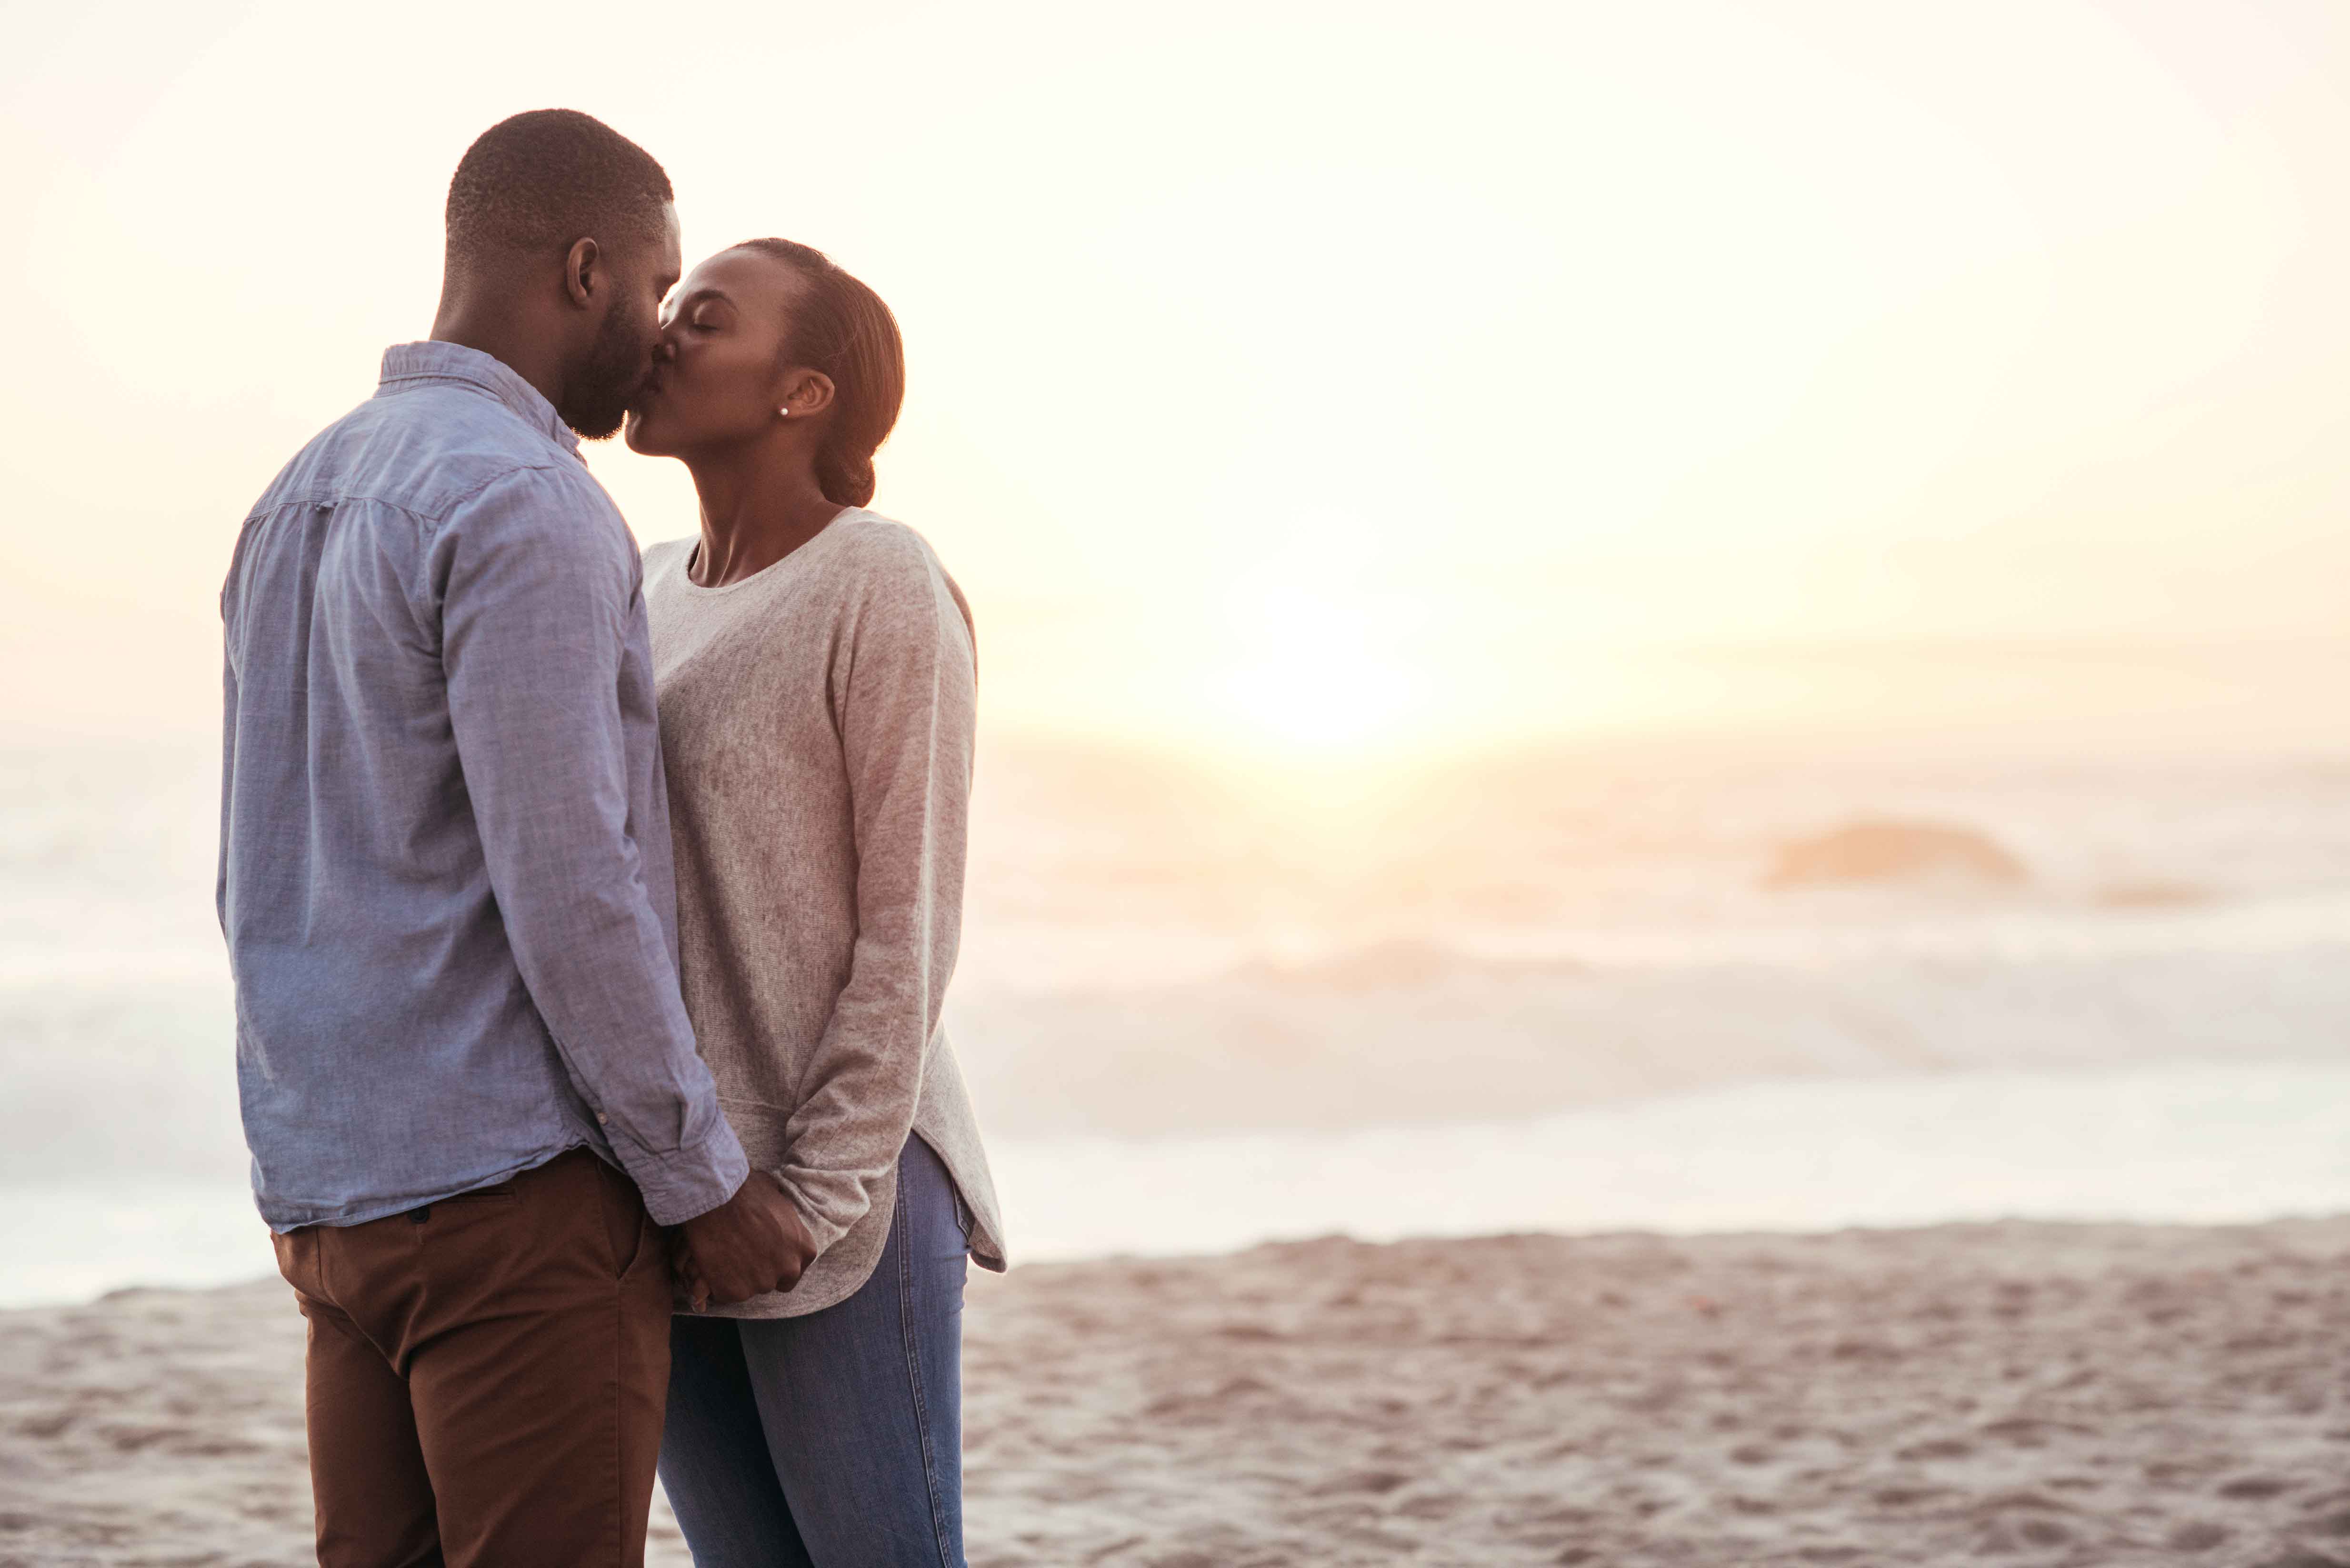 3 MARRIAGE LESSONS Iâ€™VE LEARNED